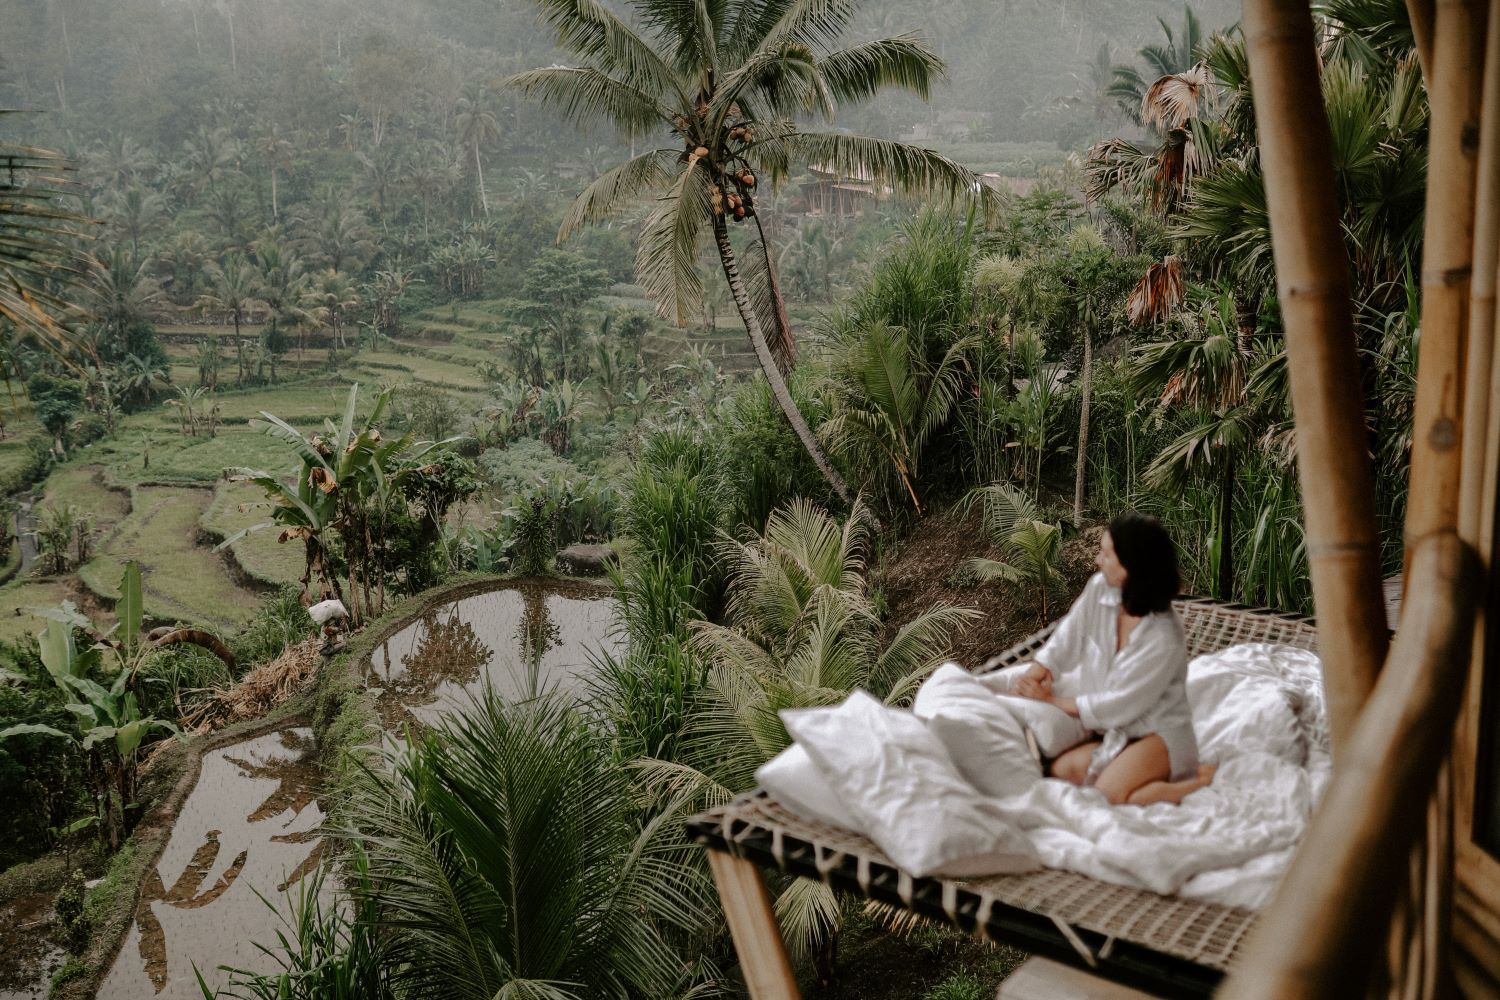 A guest at a hotel in Bali, Indonesia, surrounded by jungle, palm trees and rice fields.